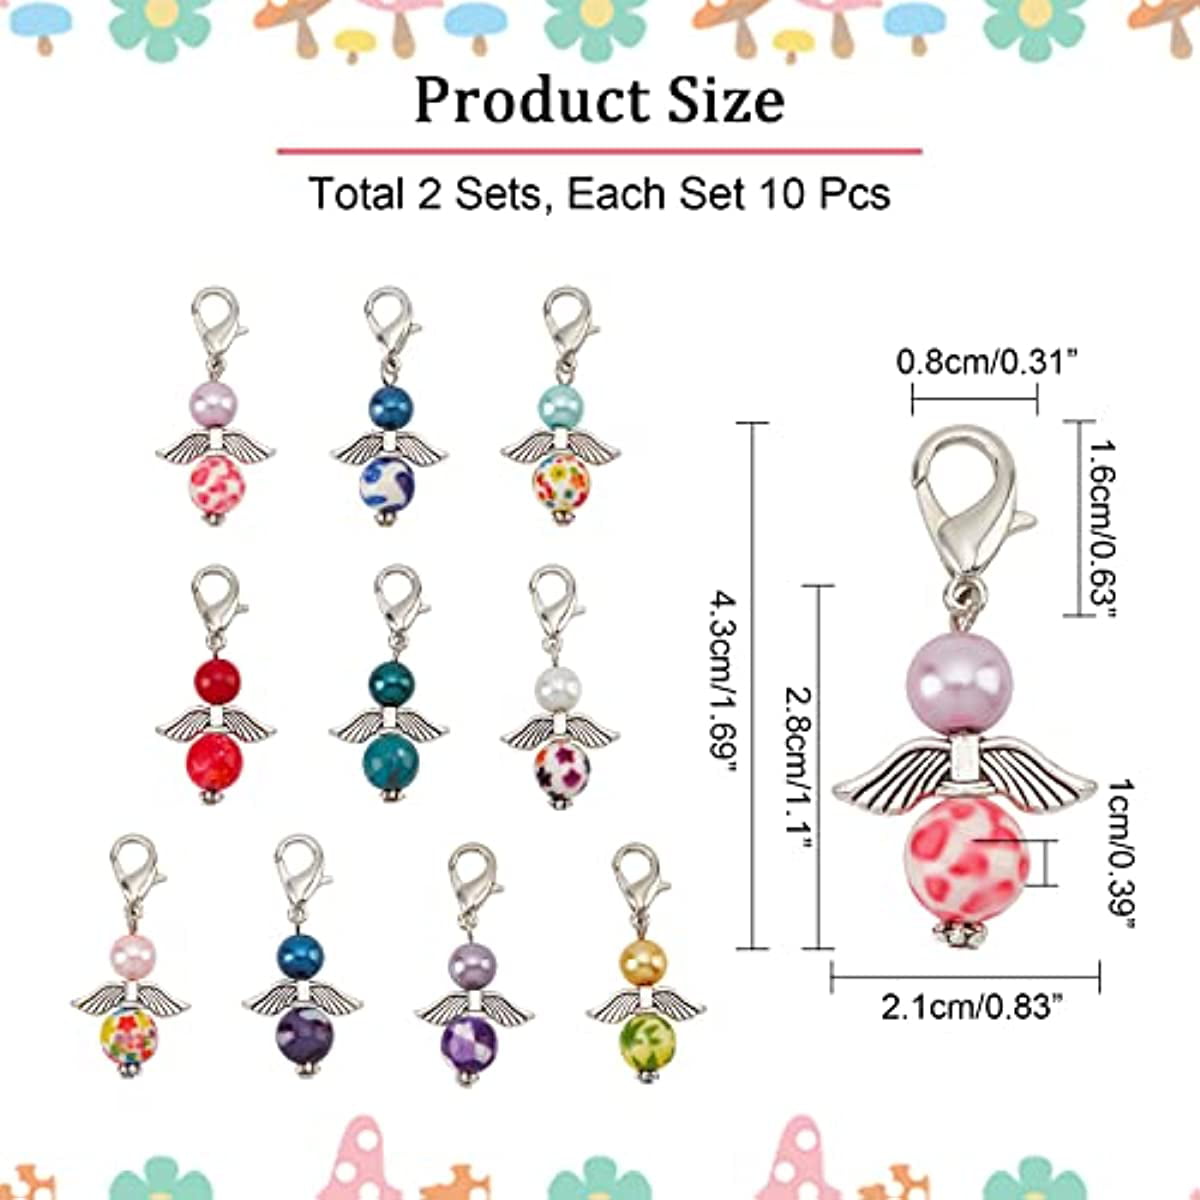 Beachcomber Stitch Markers Sets - each set includes 6 makers made